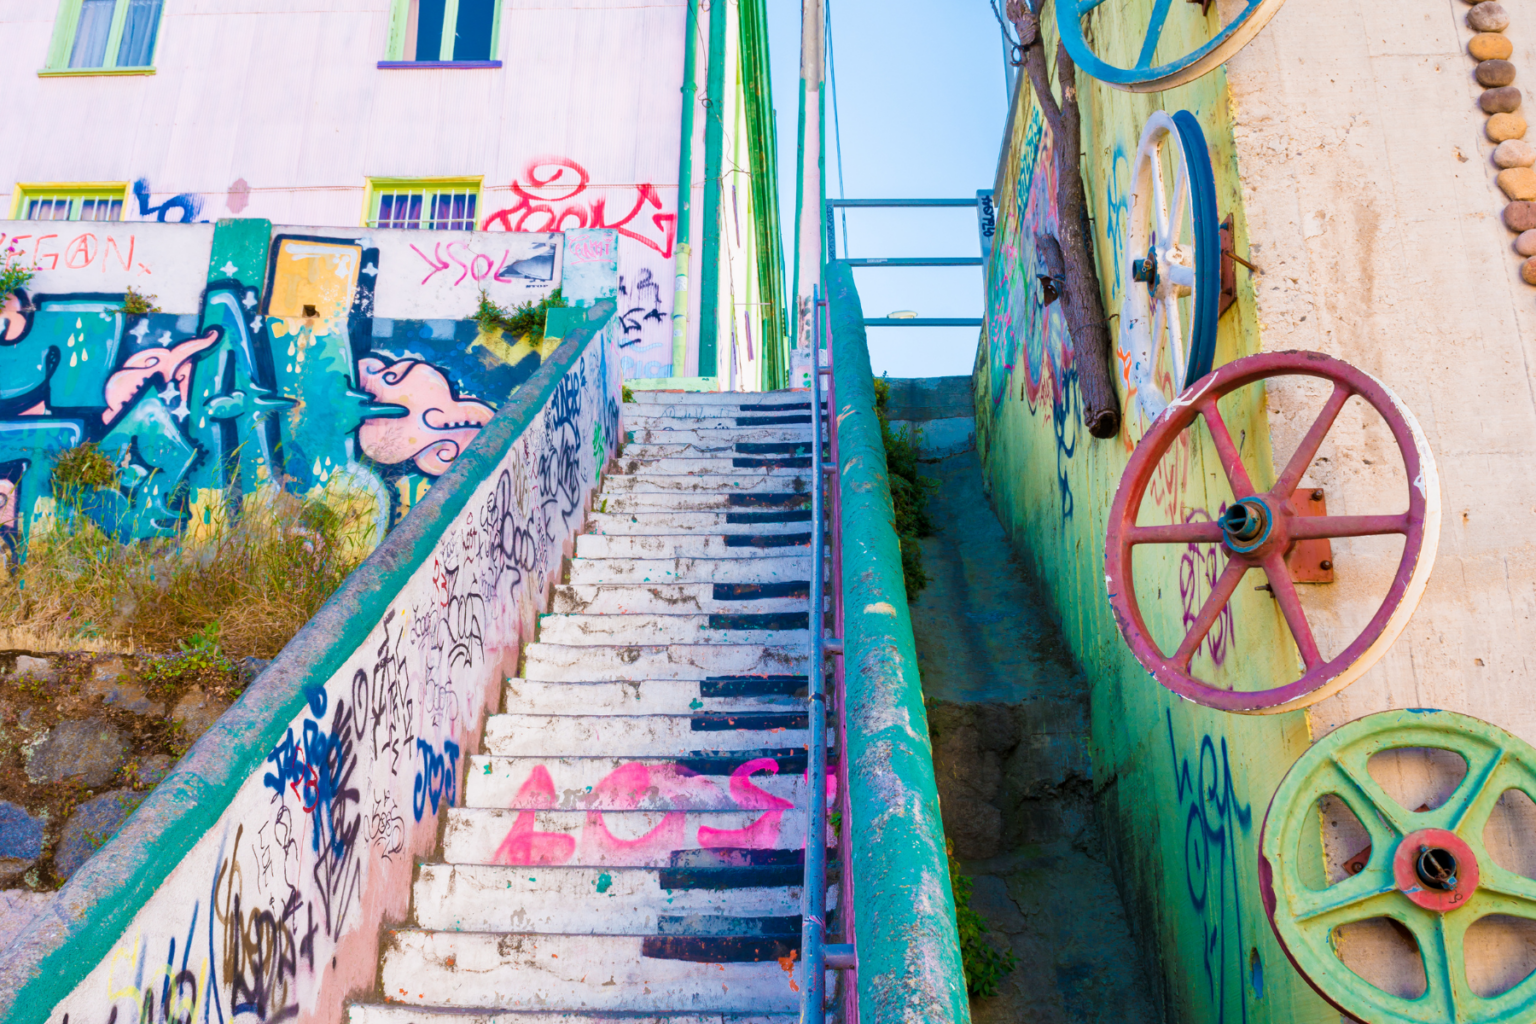 Looking up at colorful outdoor stairs painted like piano keys, with graffiti art on the surrounding buildings